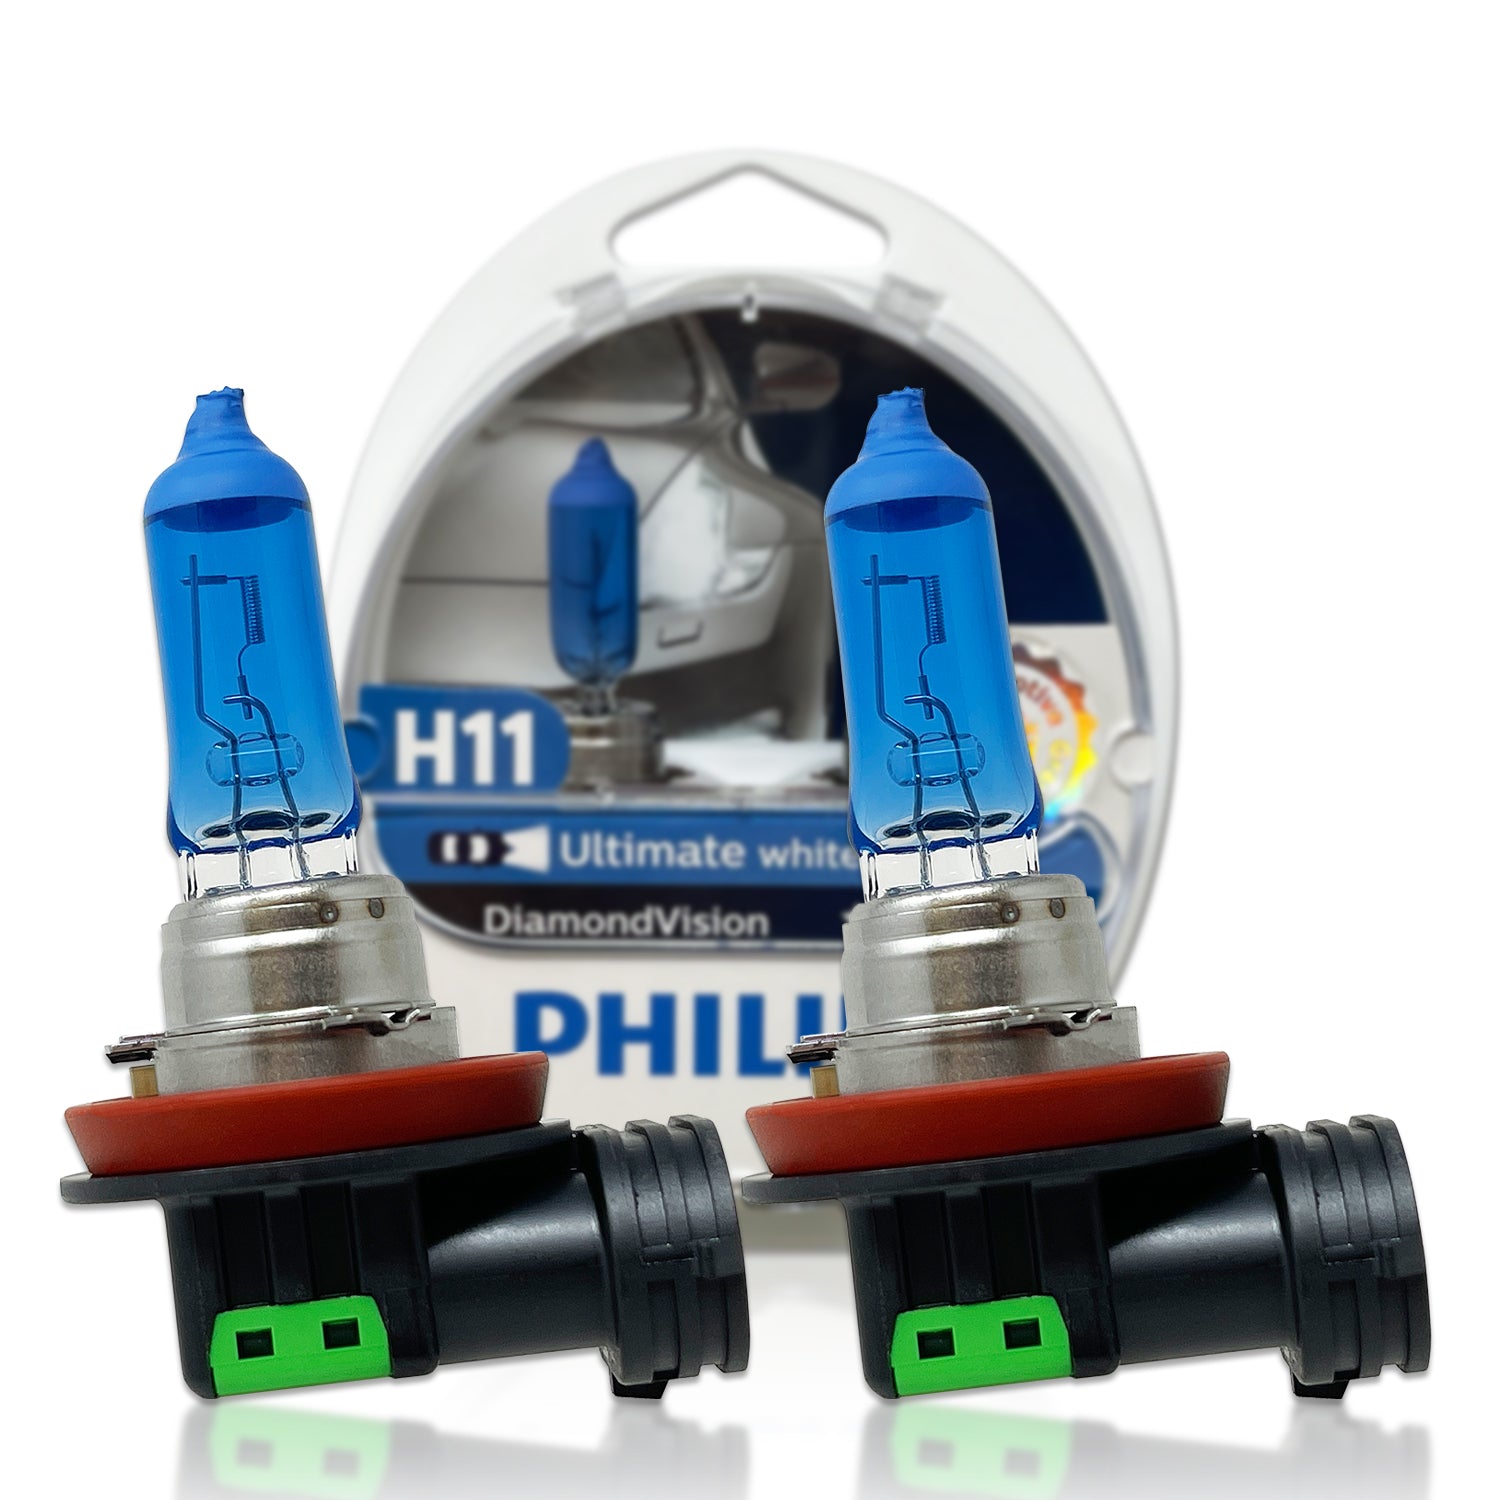 9003 H4 Philips 12342XVPS2 XtremeVision PRO150 Halogen Bulbs – HID